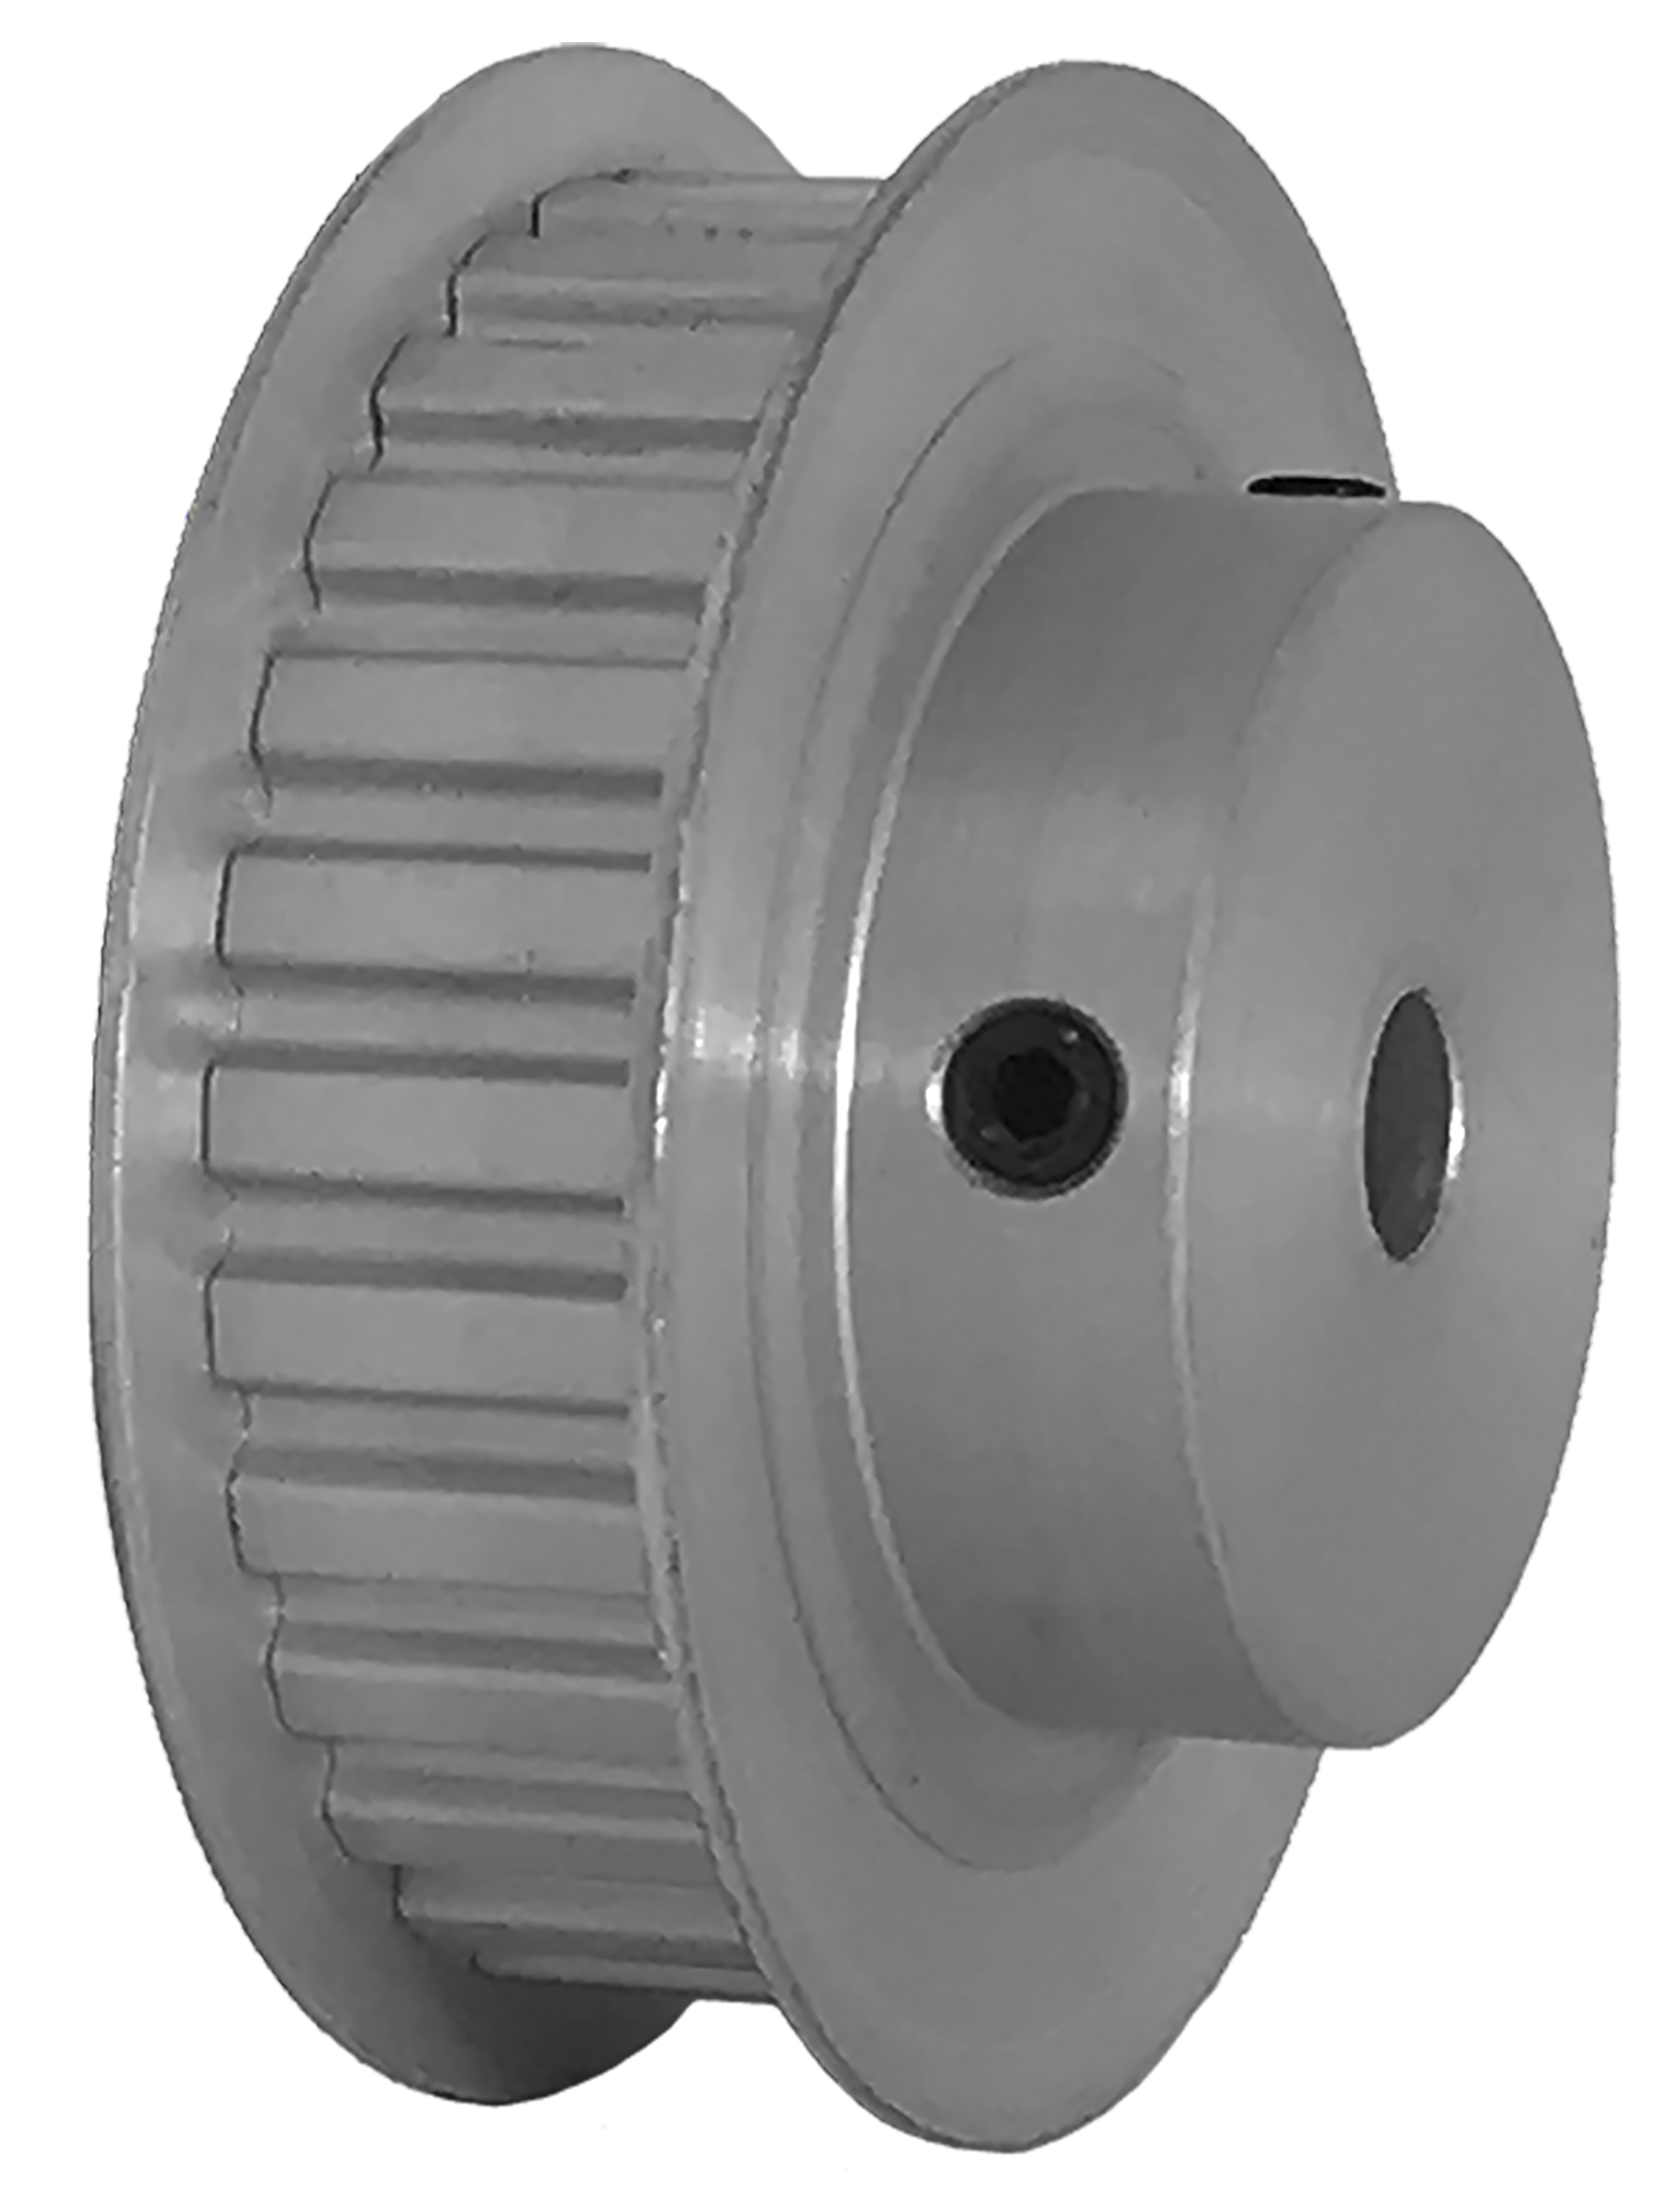 28XL037-6FA3 - Aluminum Imperial Pitch Pulleys